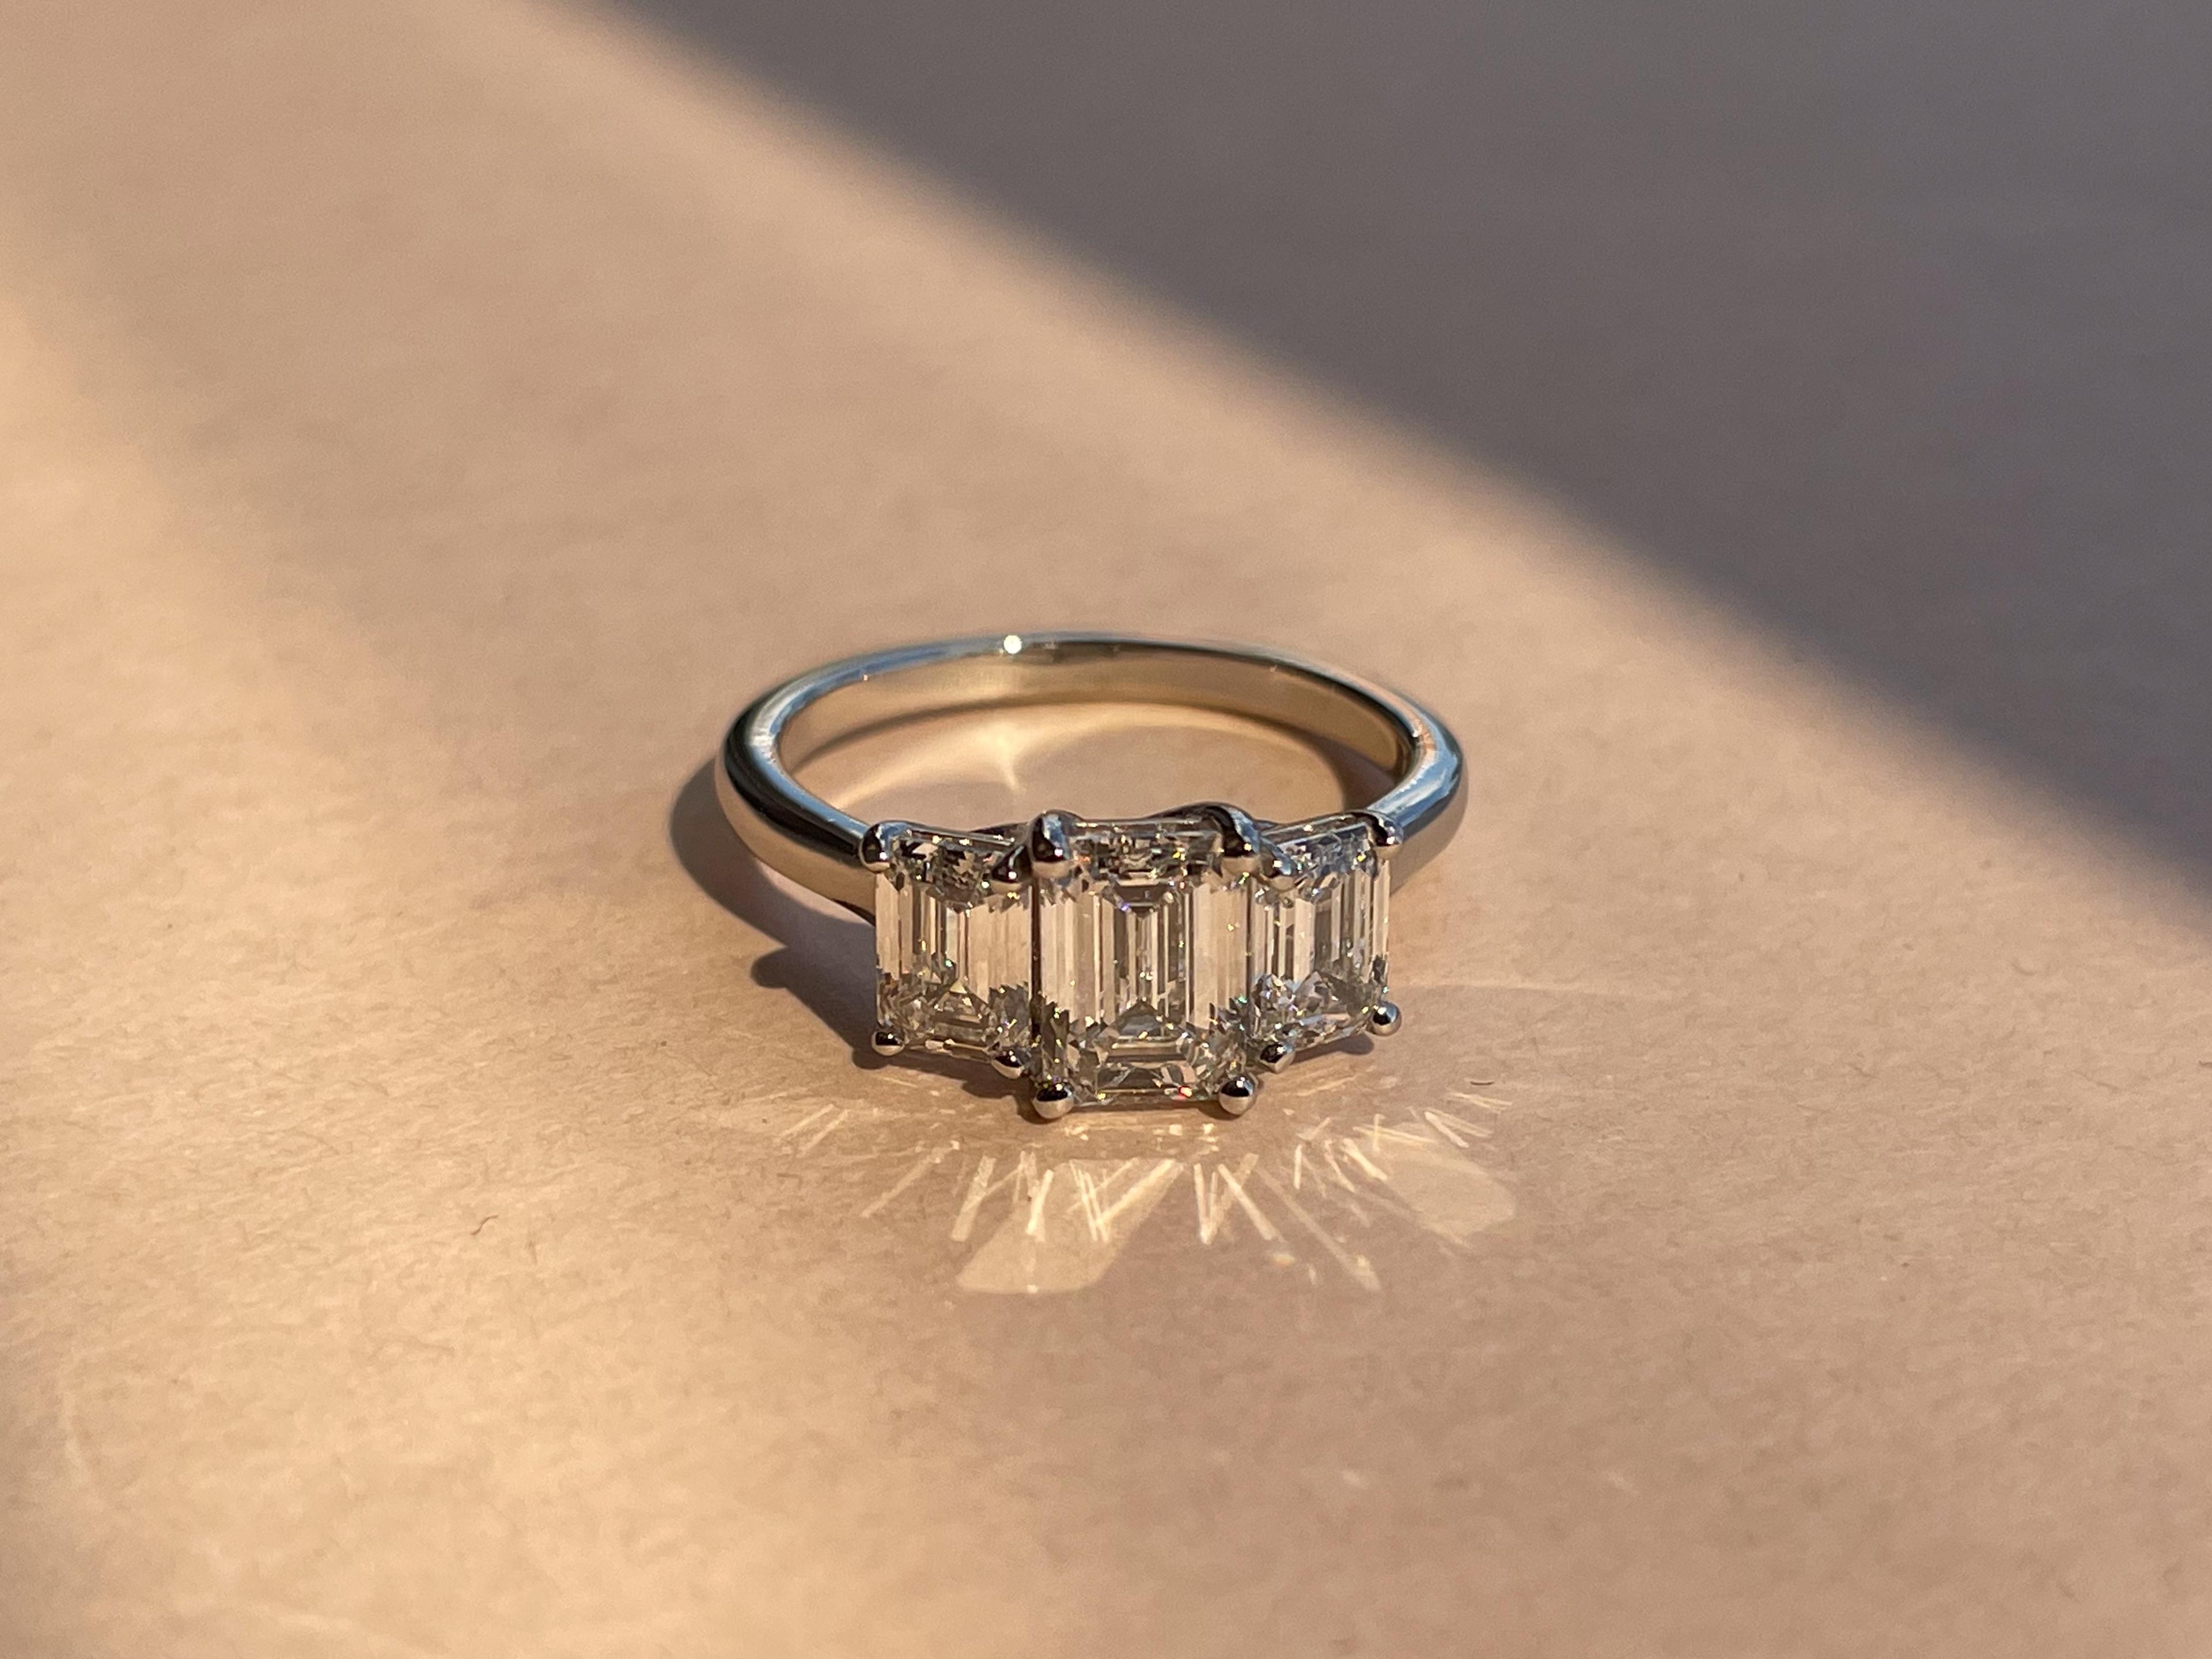 3 stone Emerald Cut diamond engagement ring with a platinum band